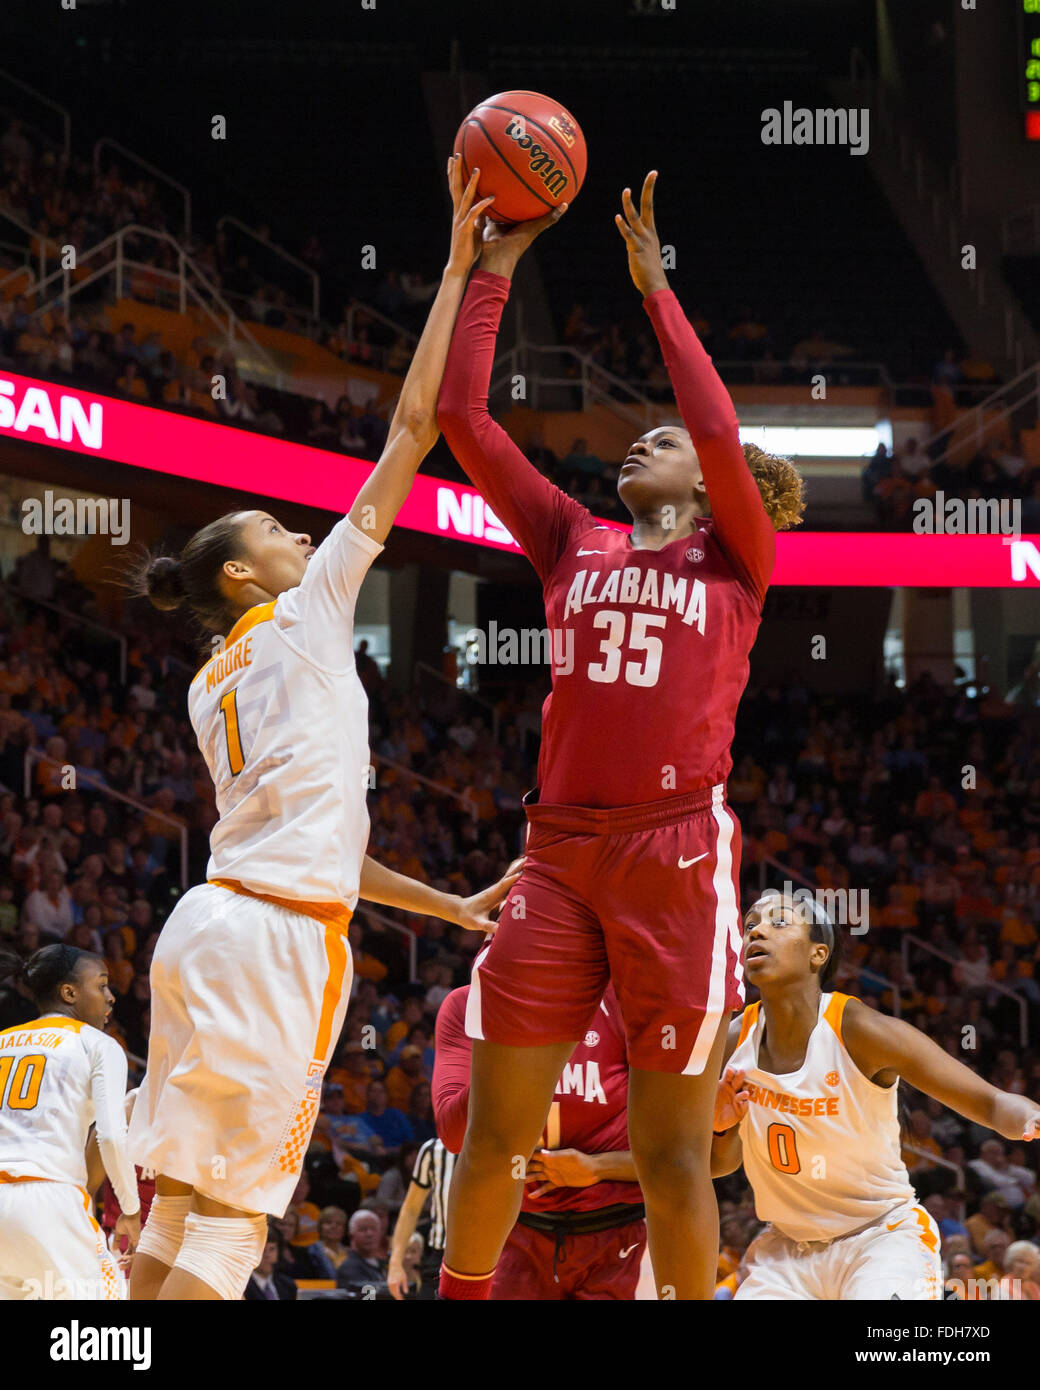 January 31, 2016: Nia Moore #1 of the Tennessee Lady Volunteers blocks the shot of Diamante Martinez #35 of the Alabama Crimson Tide during the NCAA basketball game between the University of Tennessee Lady Volunteers and the University of Alabama Crimson Tide at Thompson Boling Arena in Knoxville TN Tim Gangloff/CSM Stock Photo